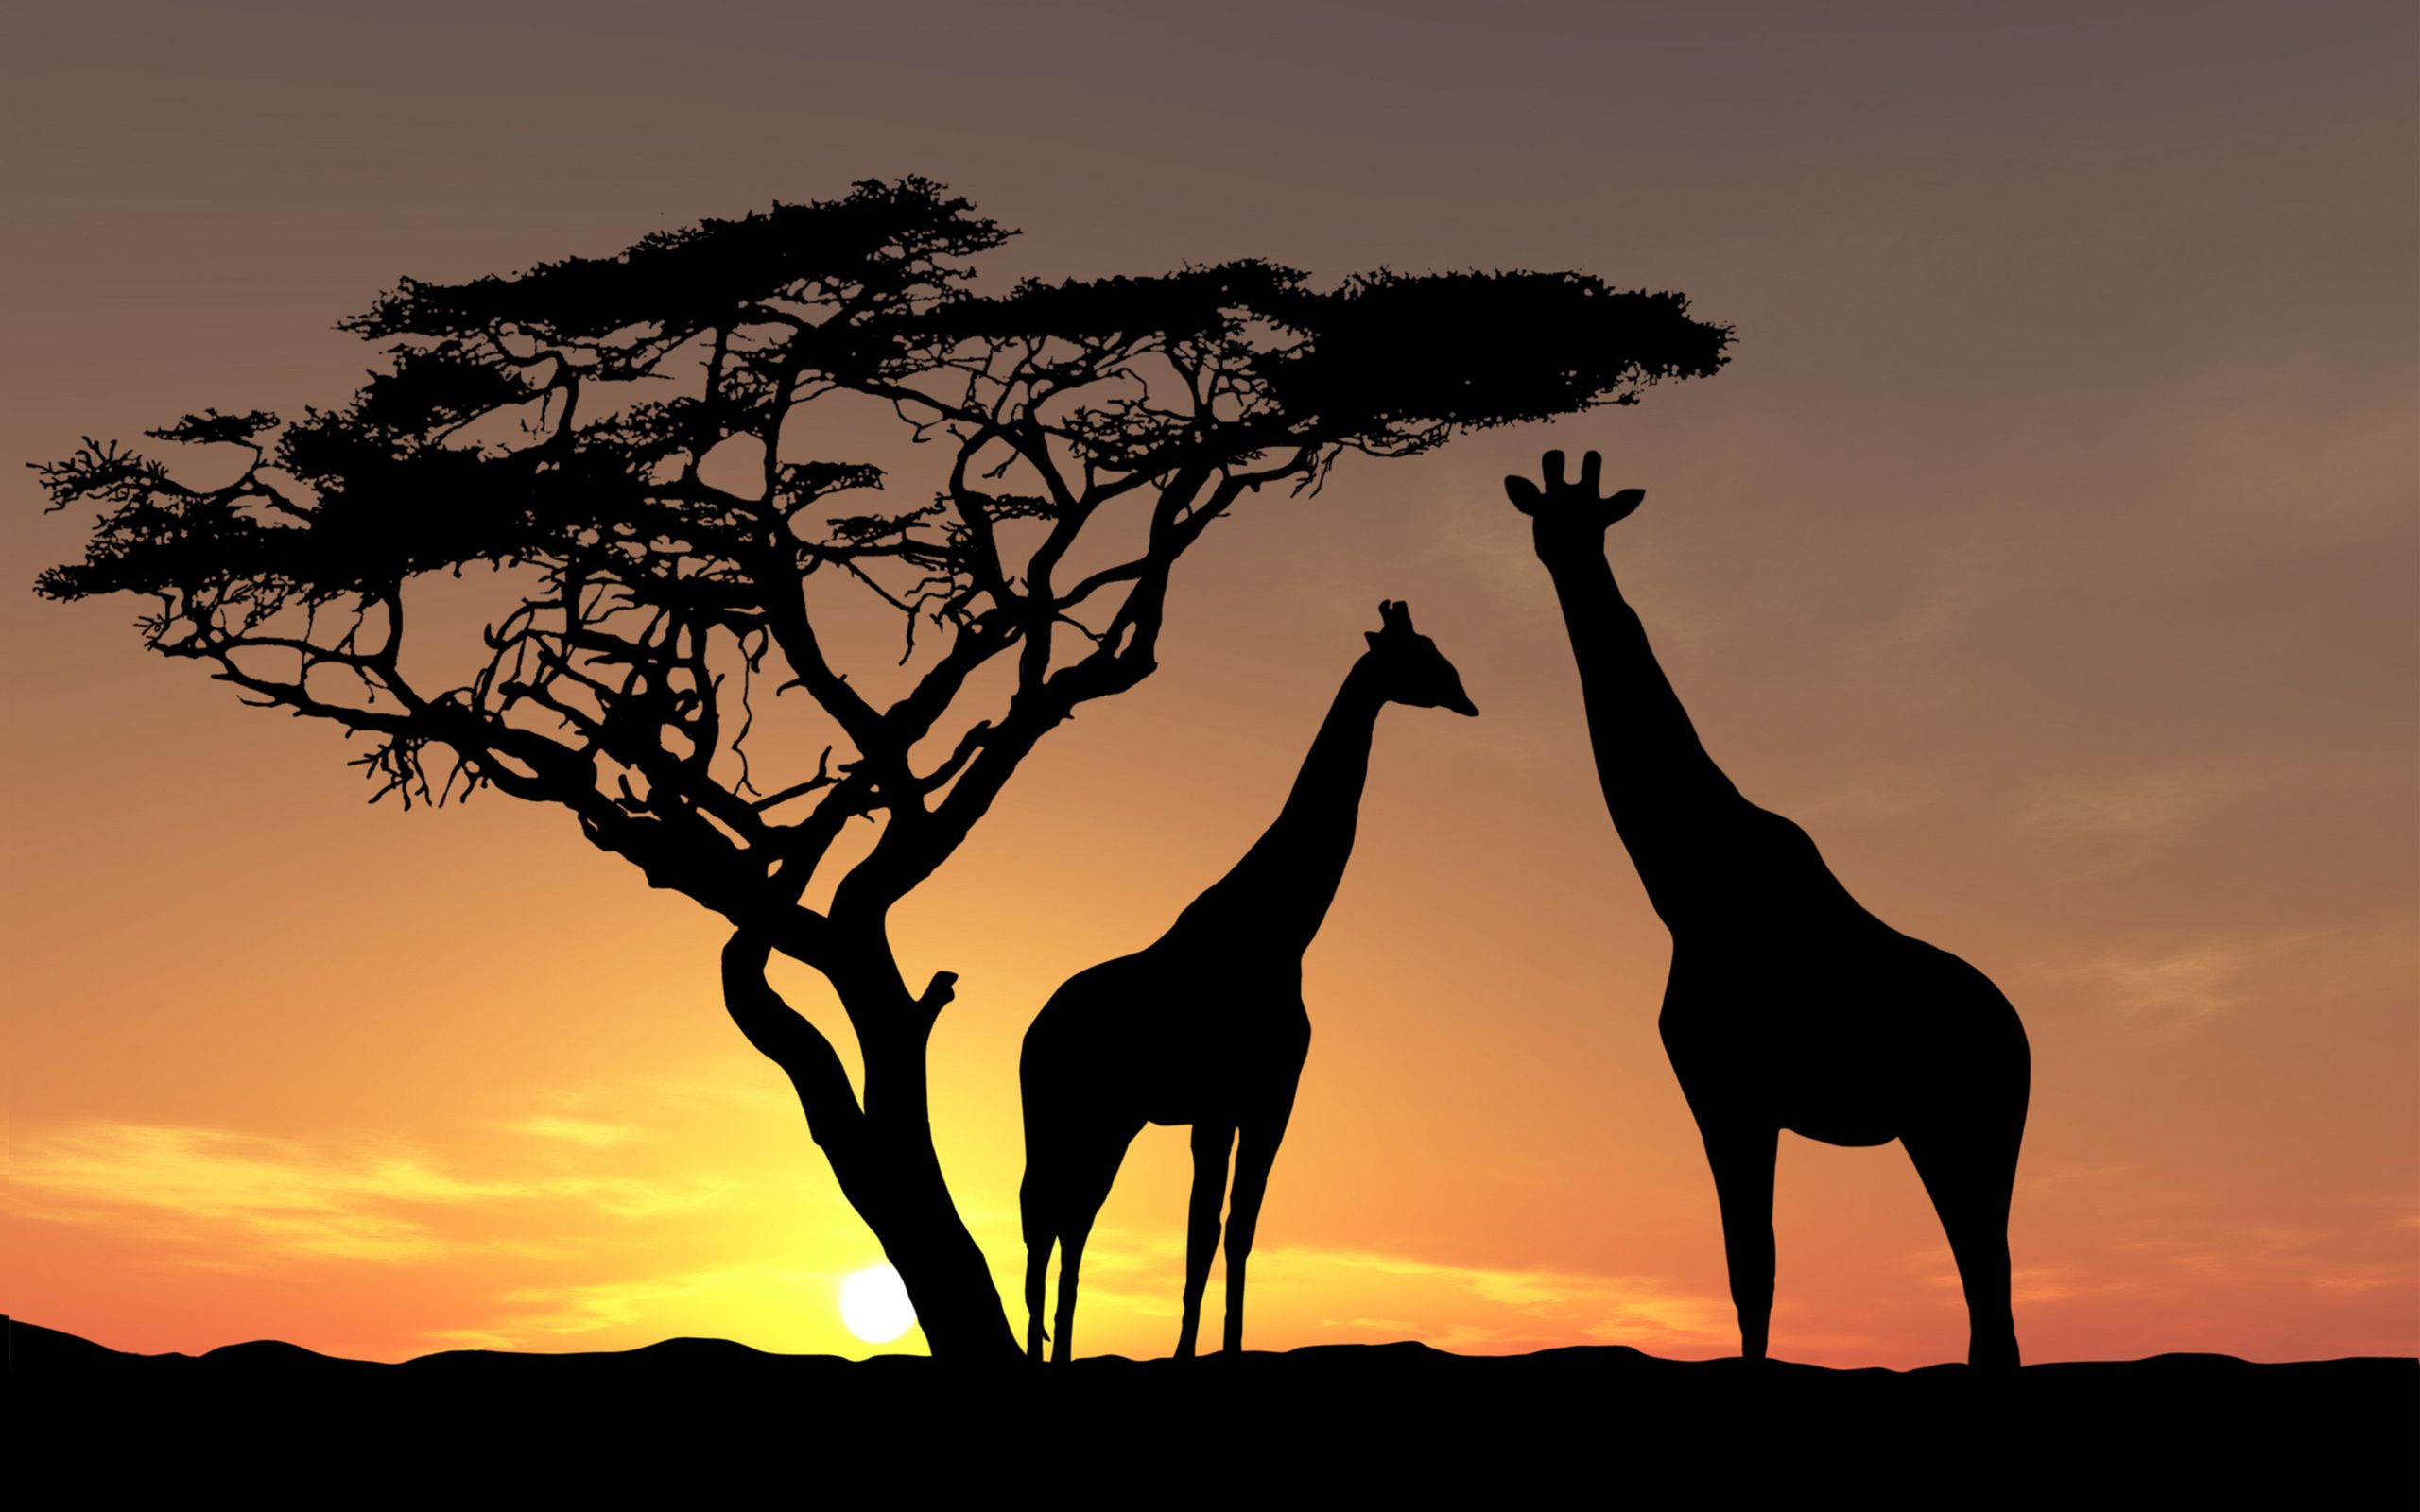 Giraffes in the sunset shadows wallpaper and image